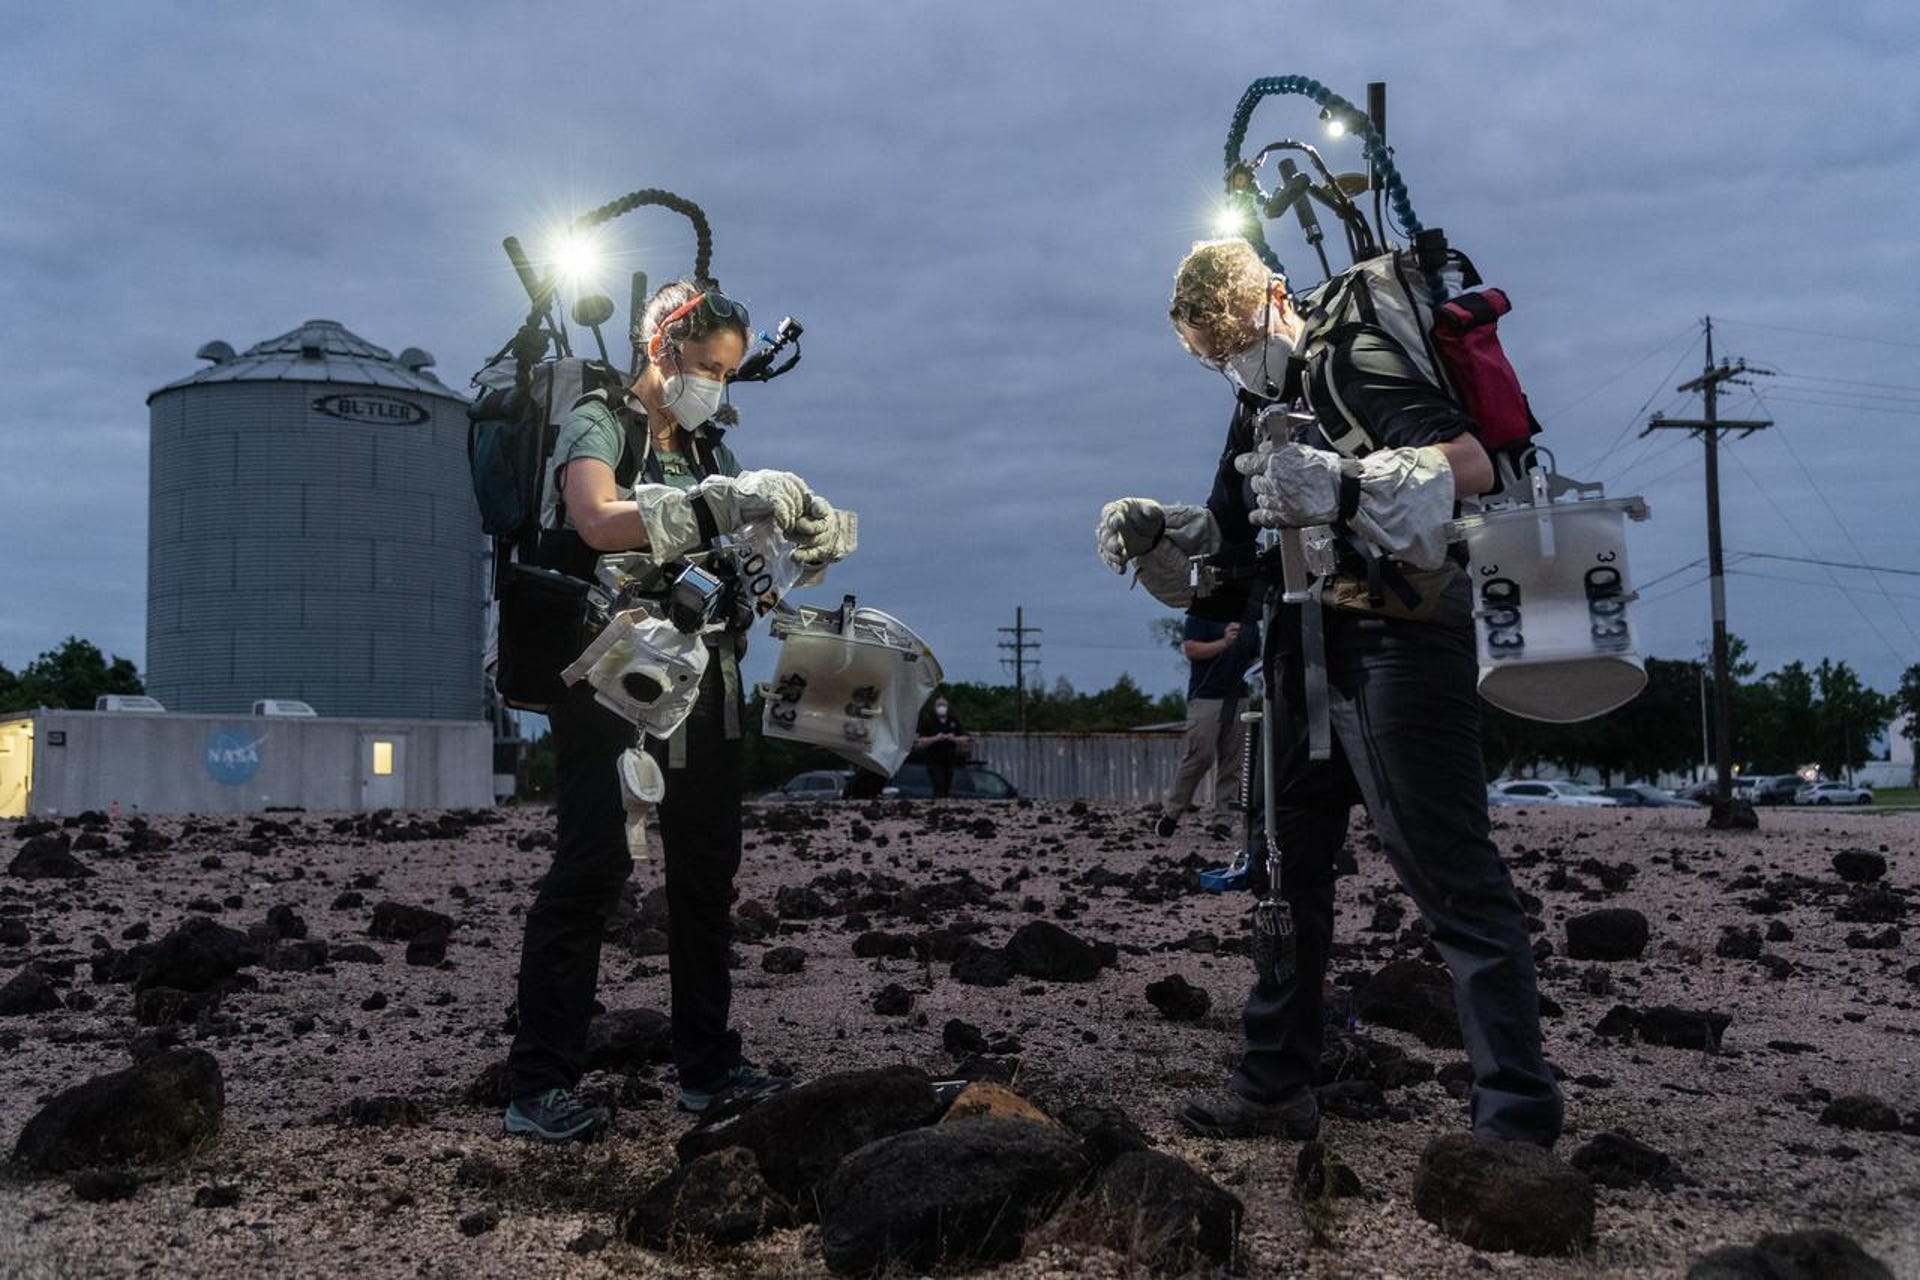 Two people wear geology testing gear in a rocky field at night with lights shining on their work.